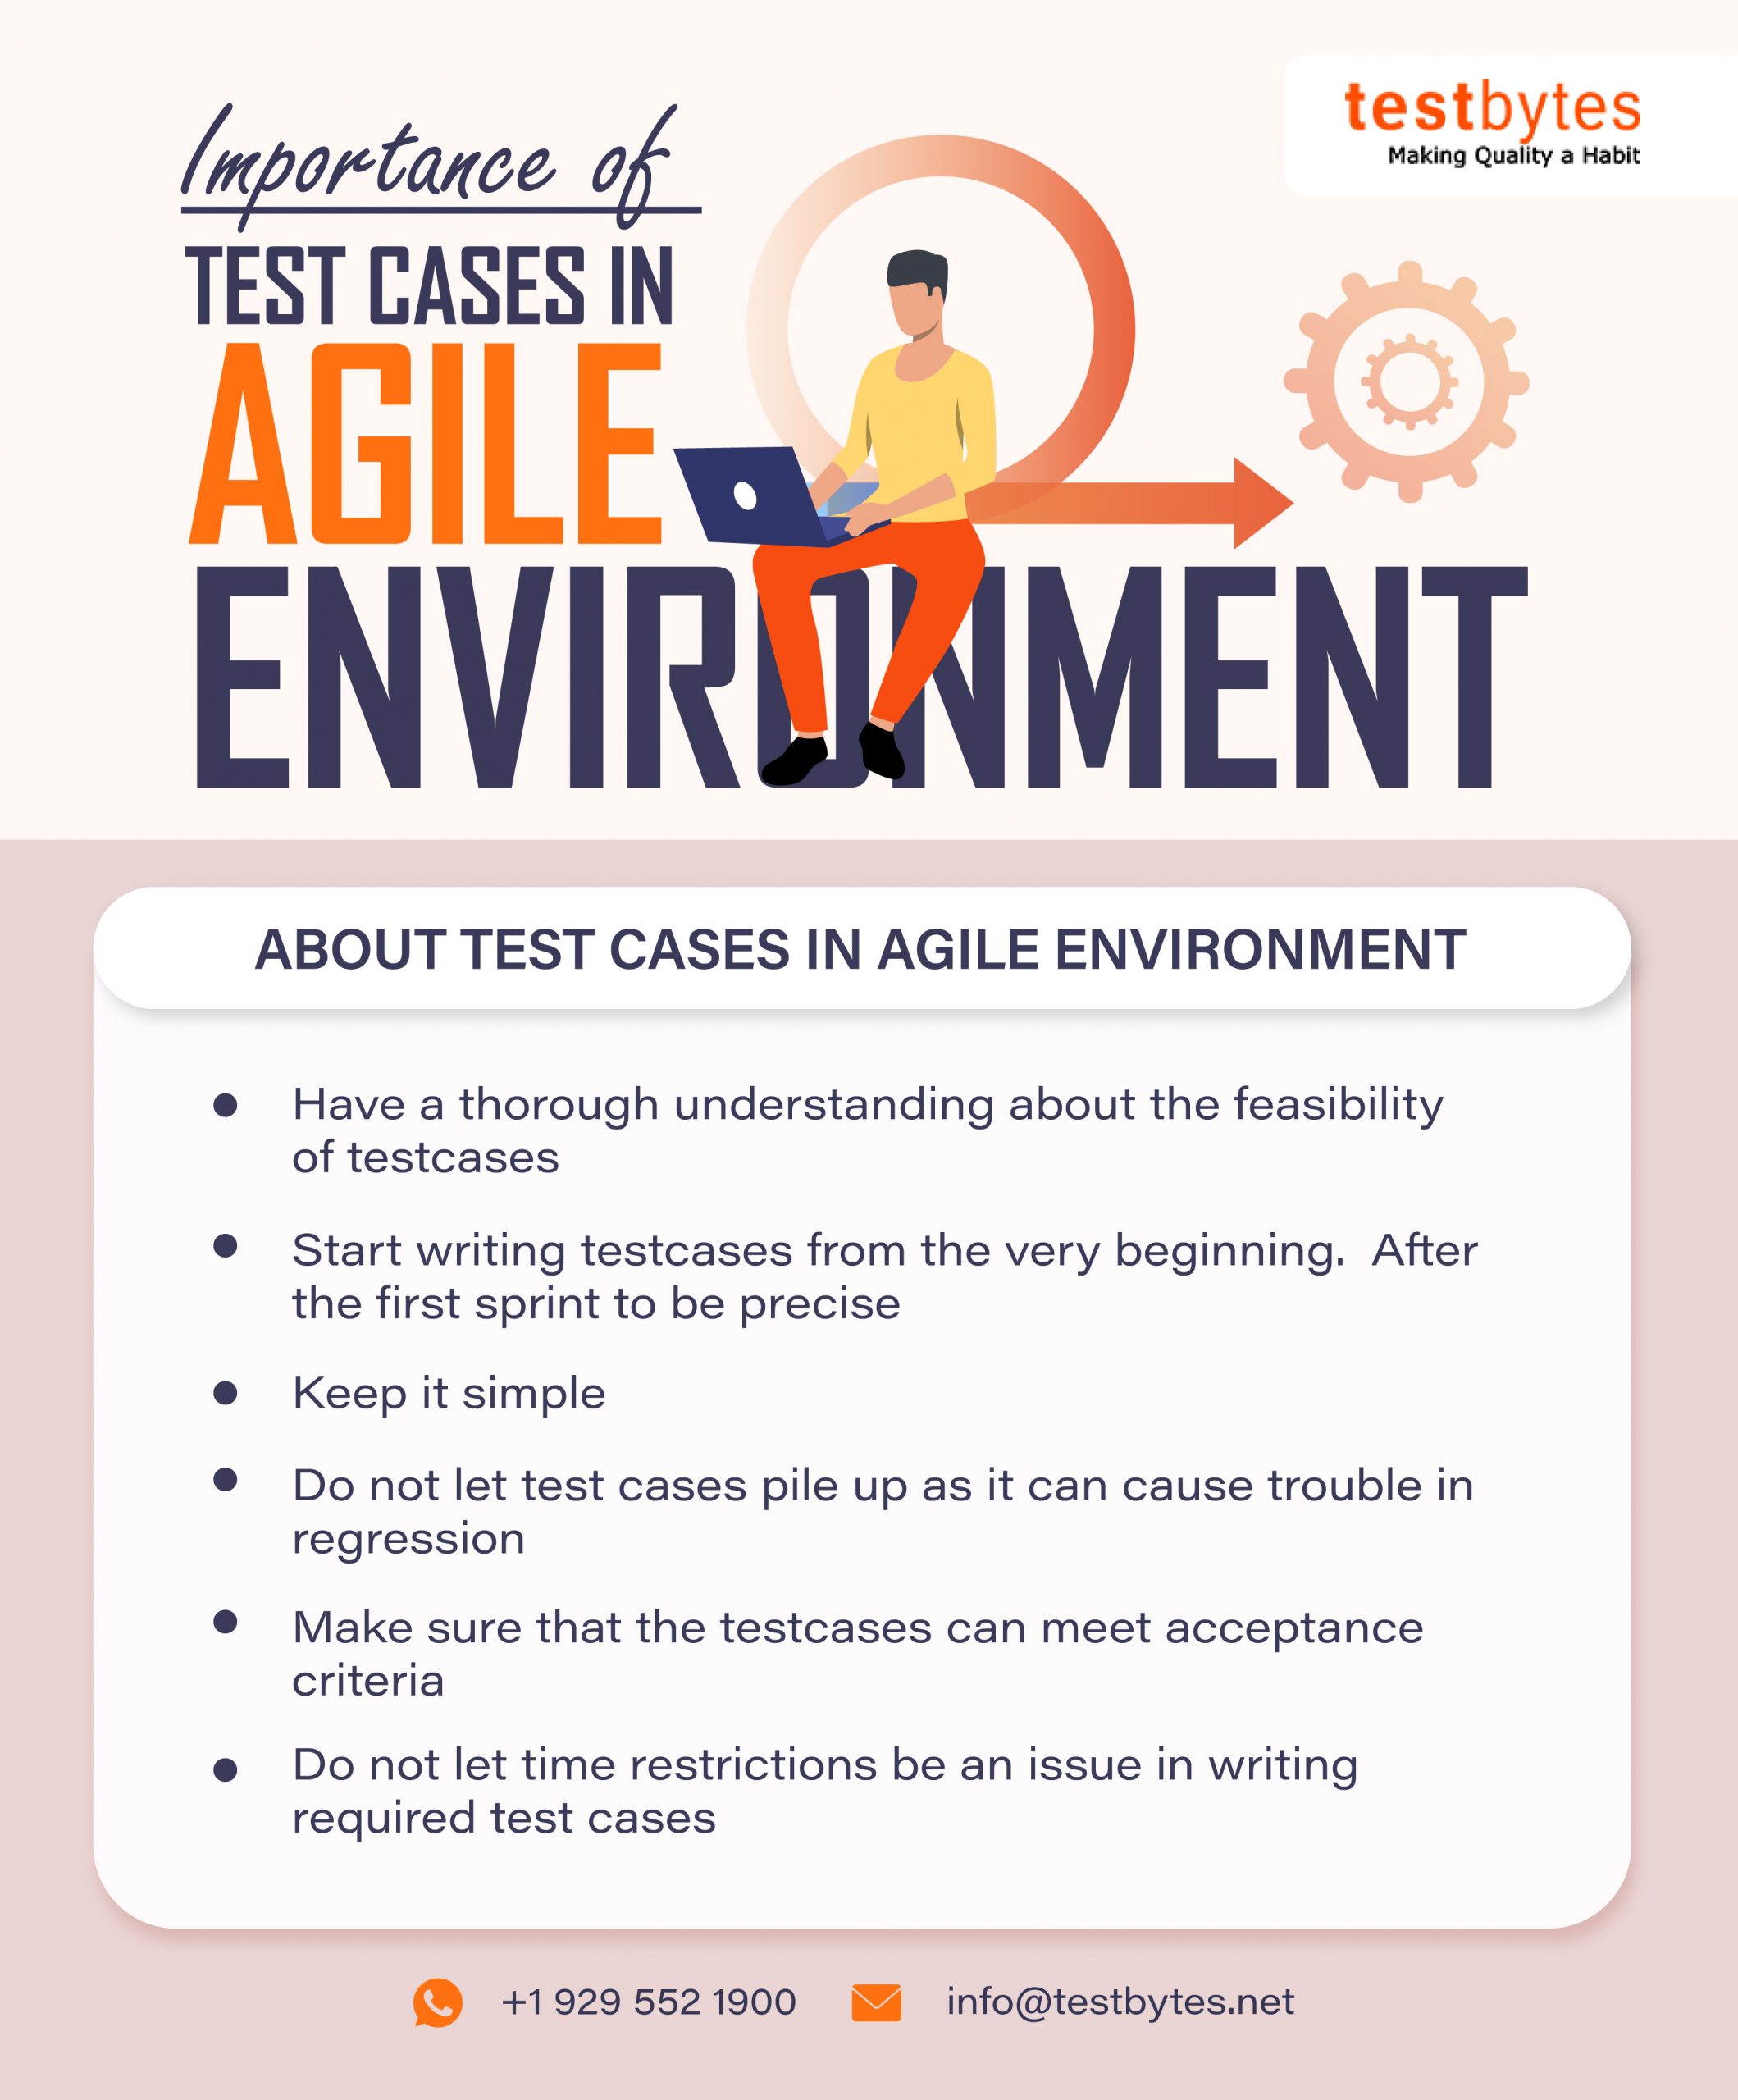 Importance of test cases in agile development